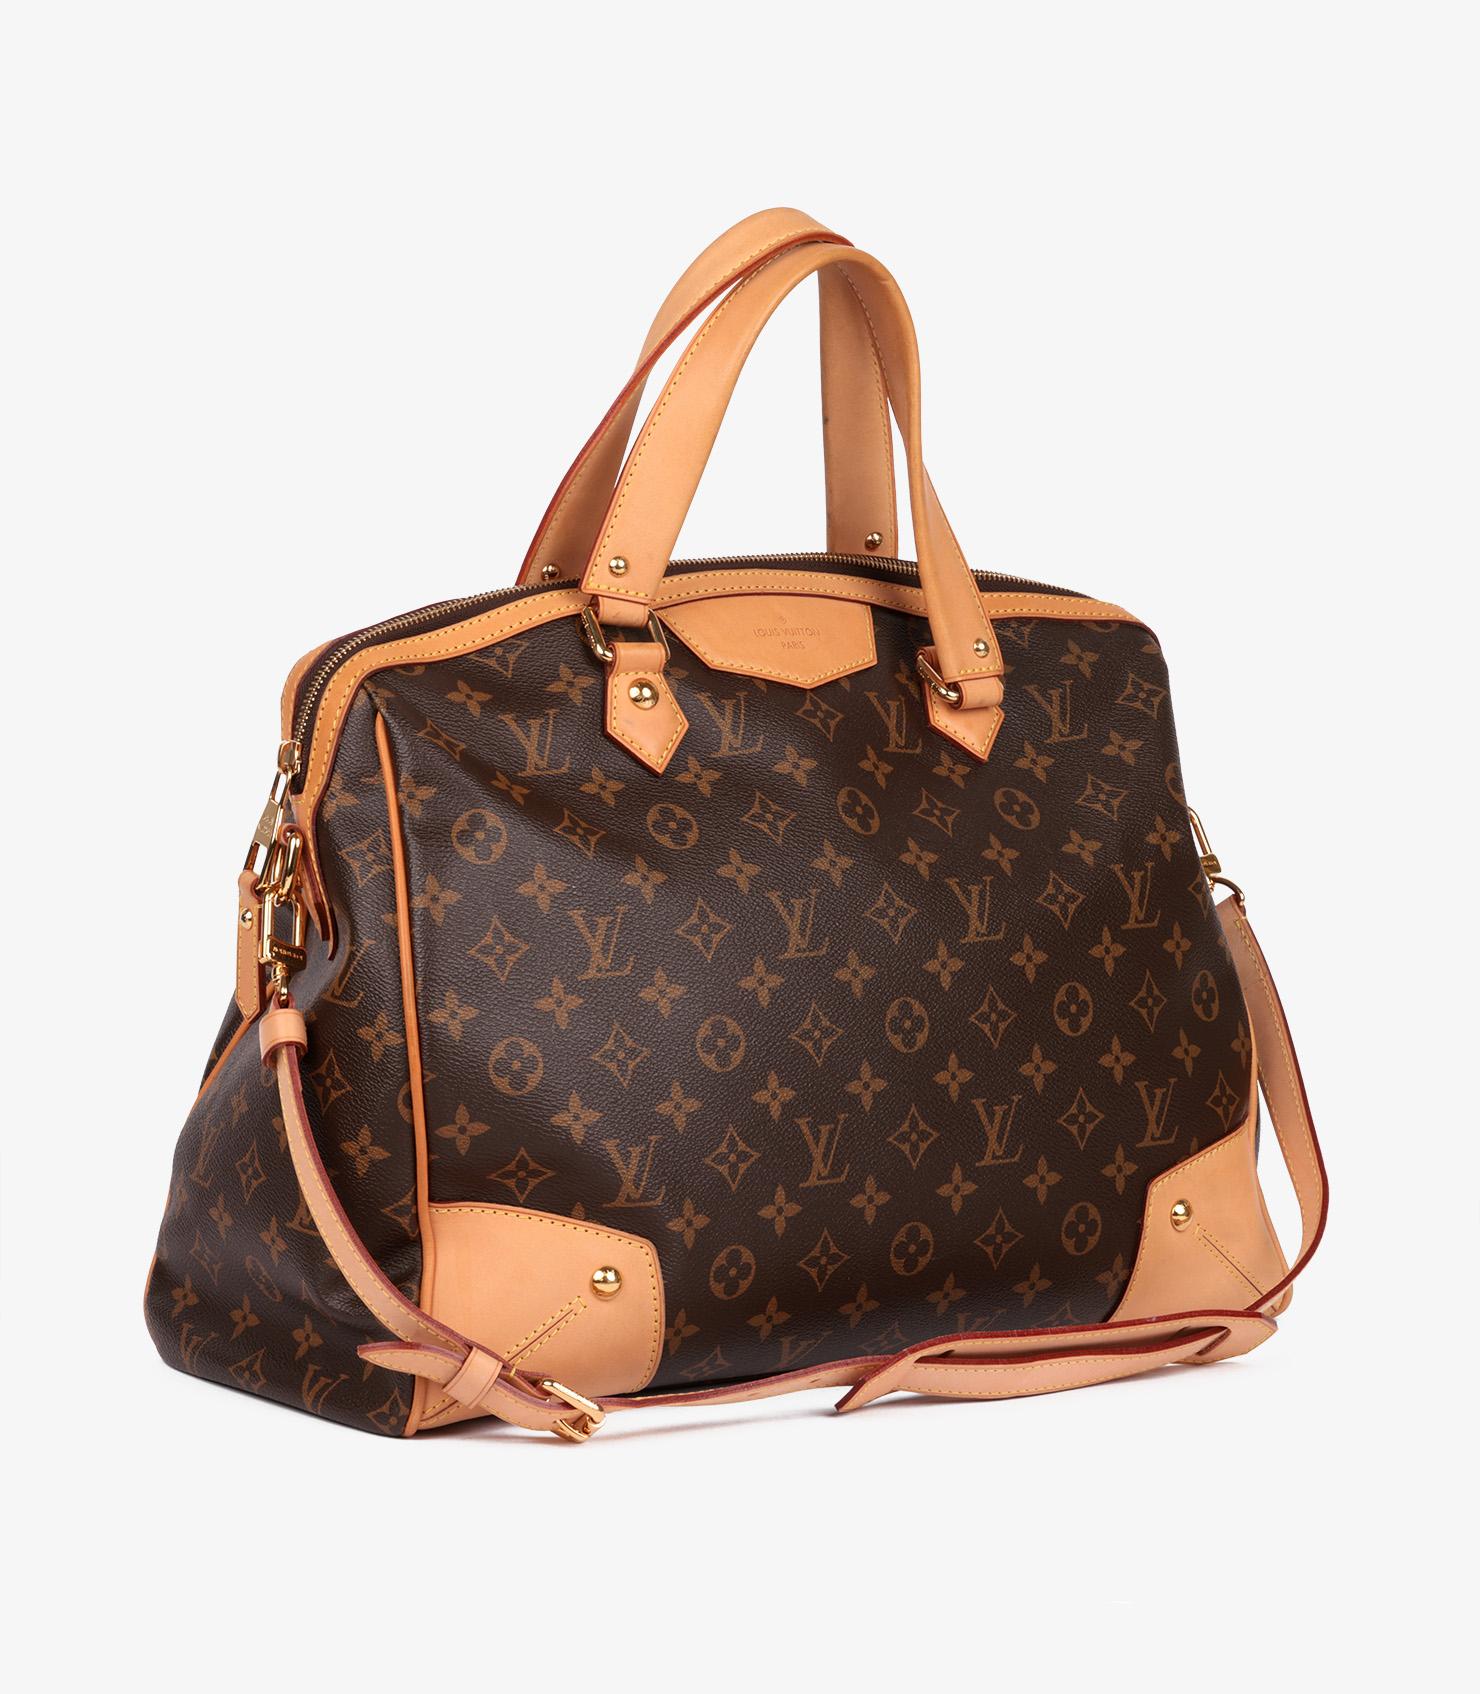 Brand- Louis Vuitton
Model- Retiro PM
Product Type- Shoulder, Tote
Serial Number- AR****
Age- Circa 2011
Accompanied By- Louis Vuitton Dust Bag, Shoulder Strap
Colour- Brown
Hardware- Golden Brass
Material(s)- Coated Canvas, Vachetta Leather-